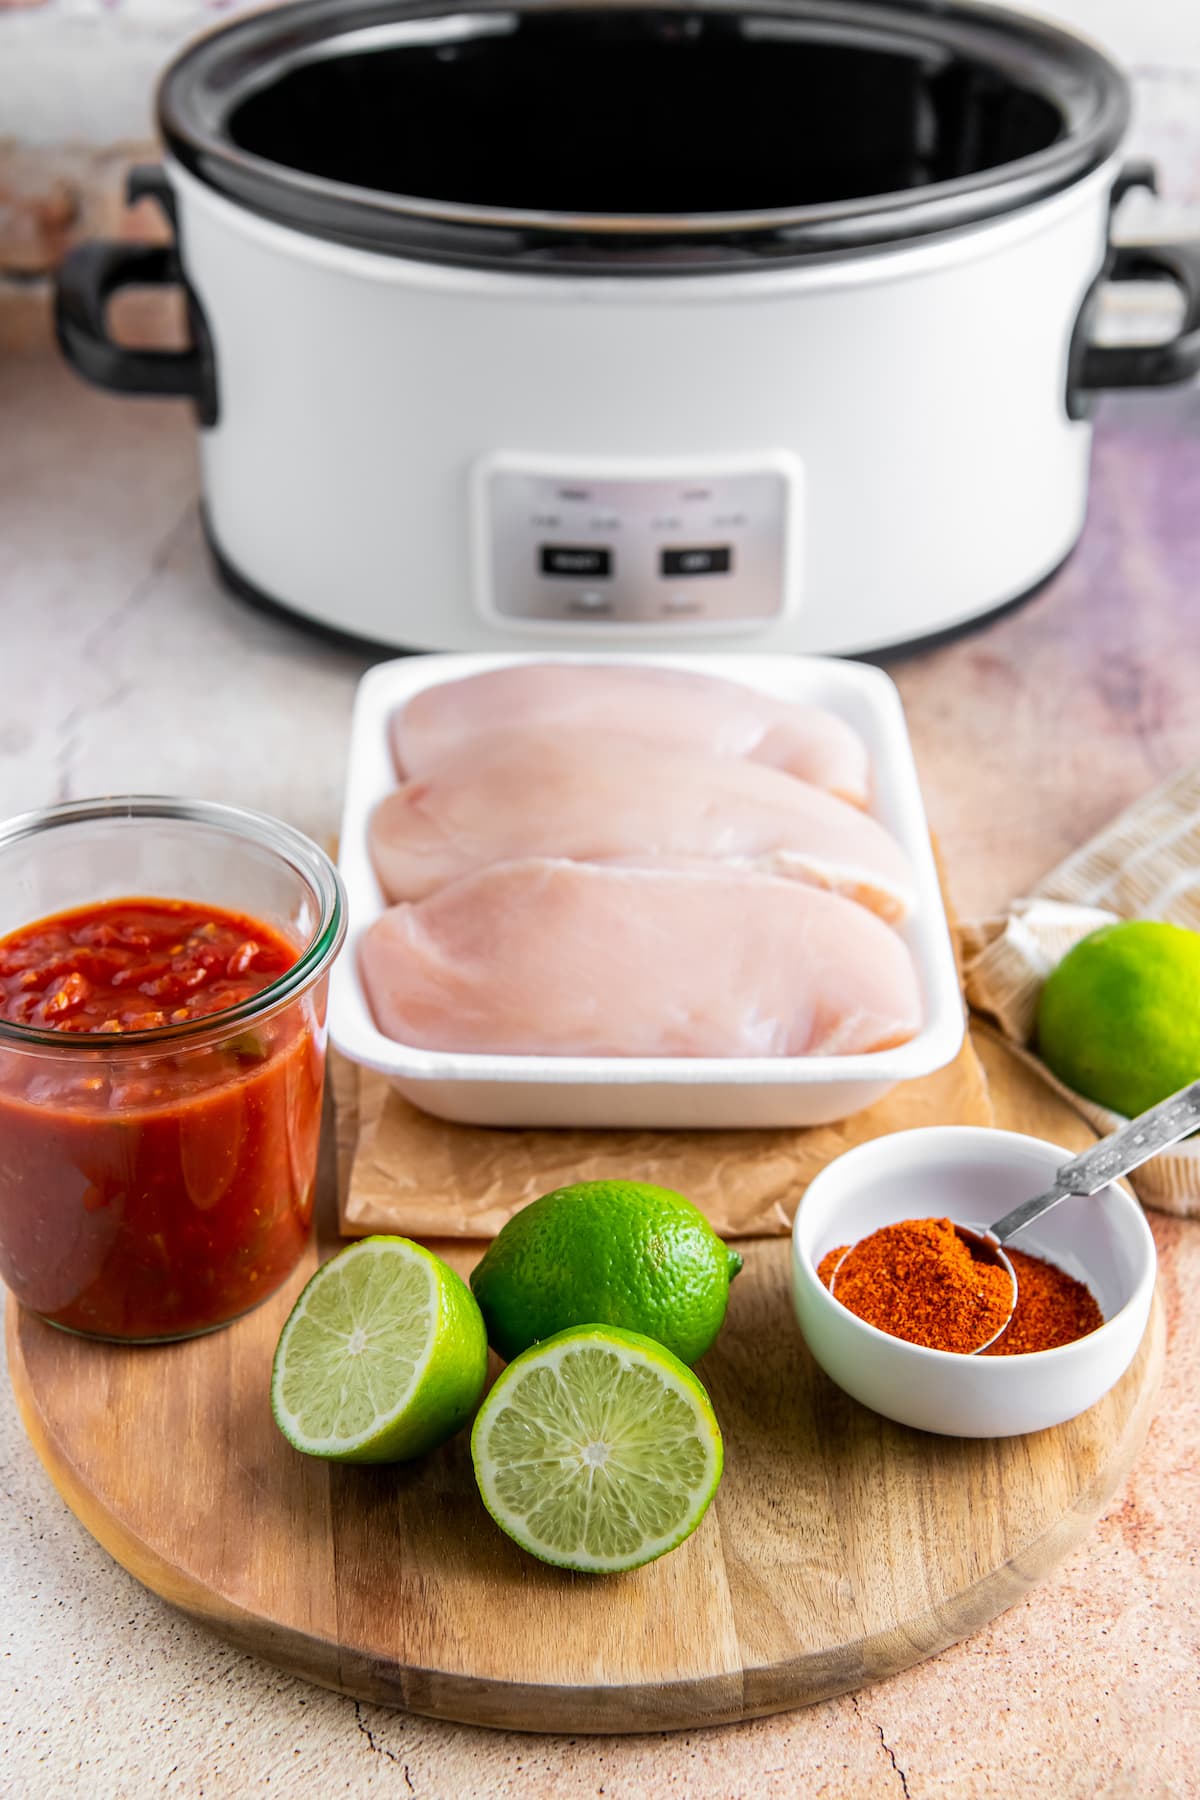 an assortment of ingredients including chicken, limes, seasoning, and salsa on a cutting board